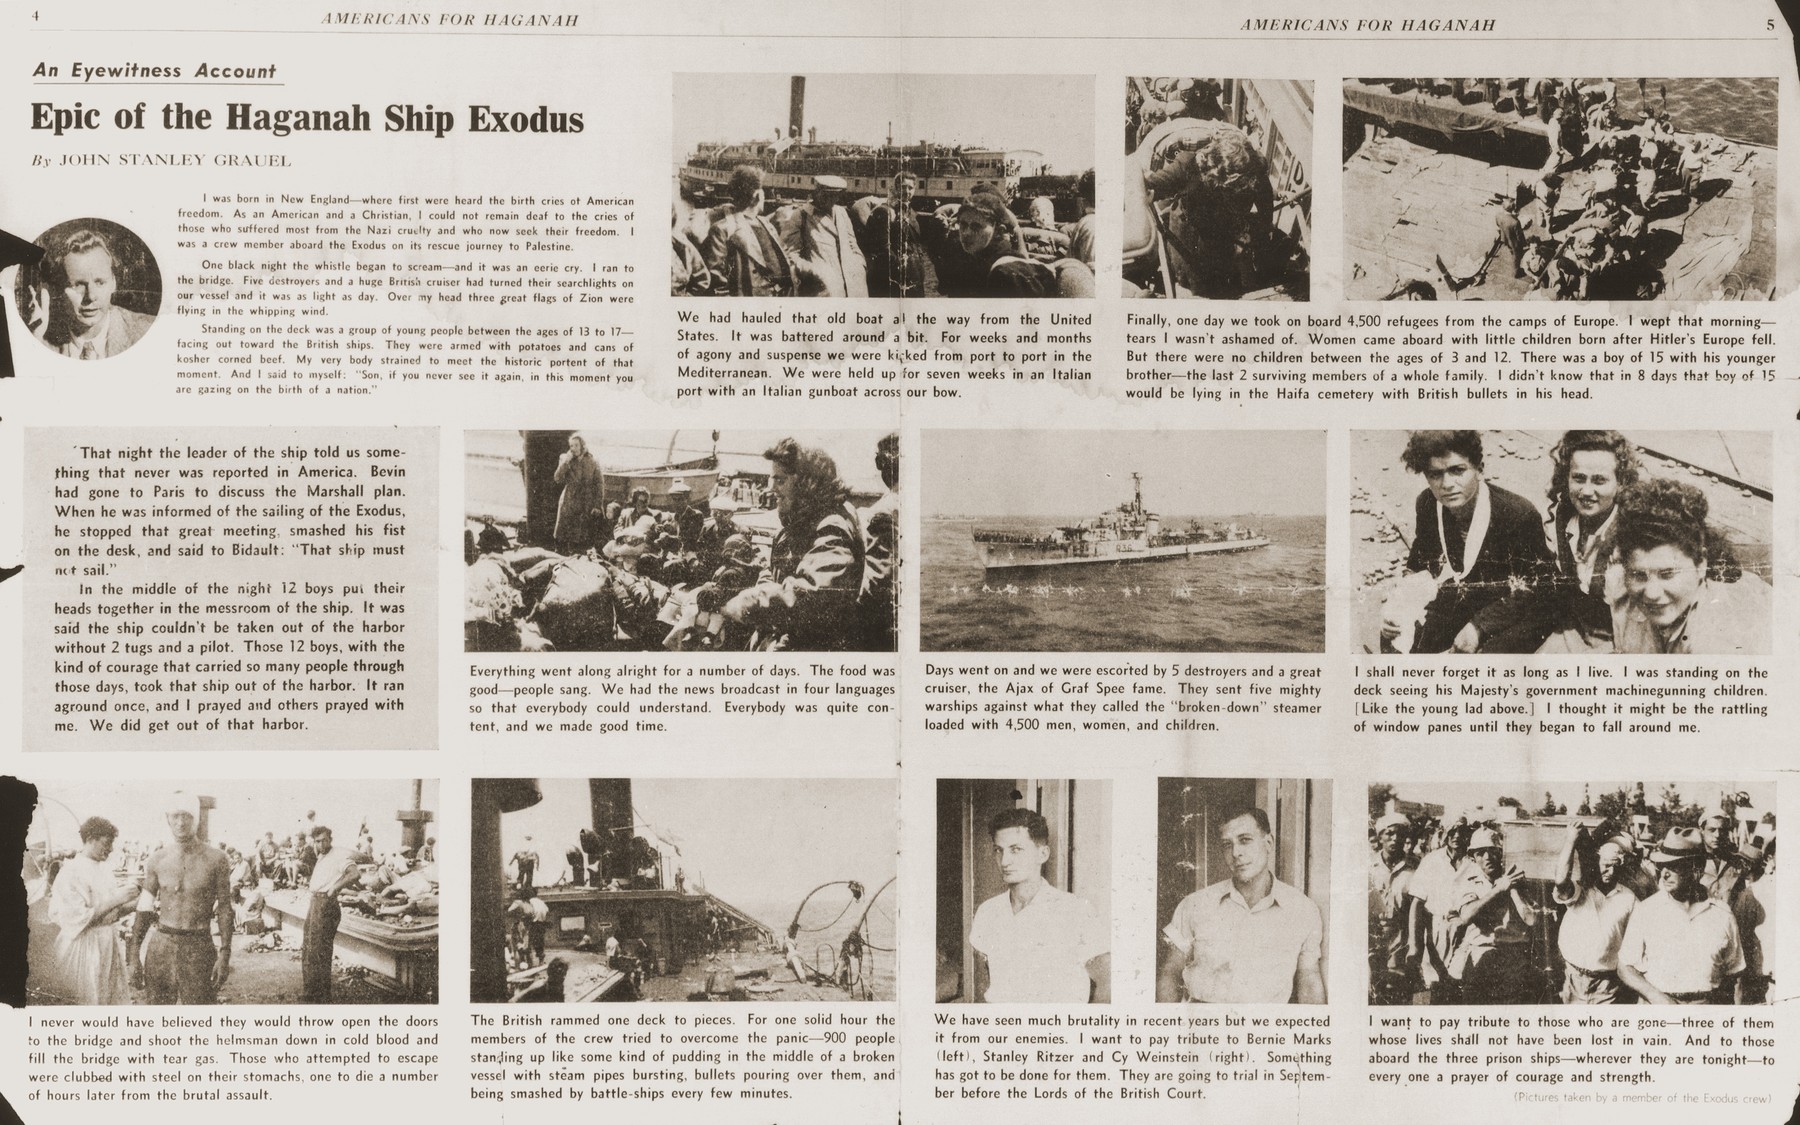 Inside page of the American Zionist newspaper, "Americans for Haganah" of September 15, 1947, featuring an illustrated eyewitness account of the Exodus 1947 by one of its crewmen, John Stanley Grauel.